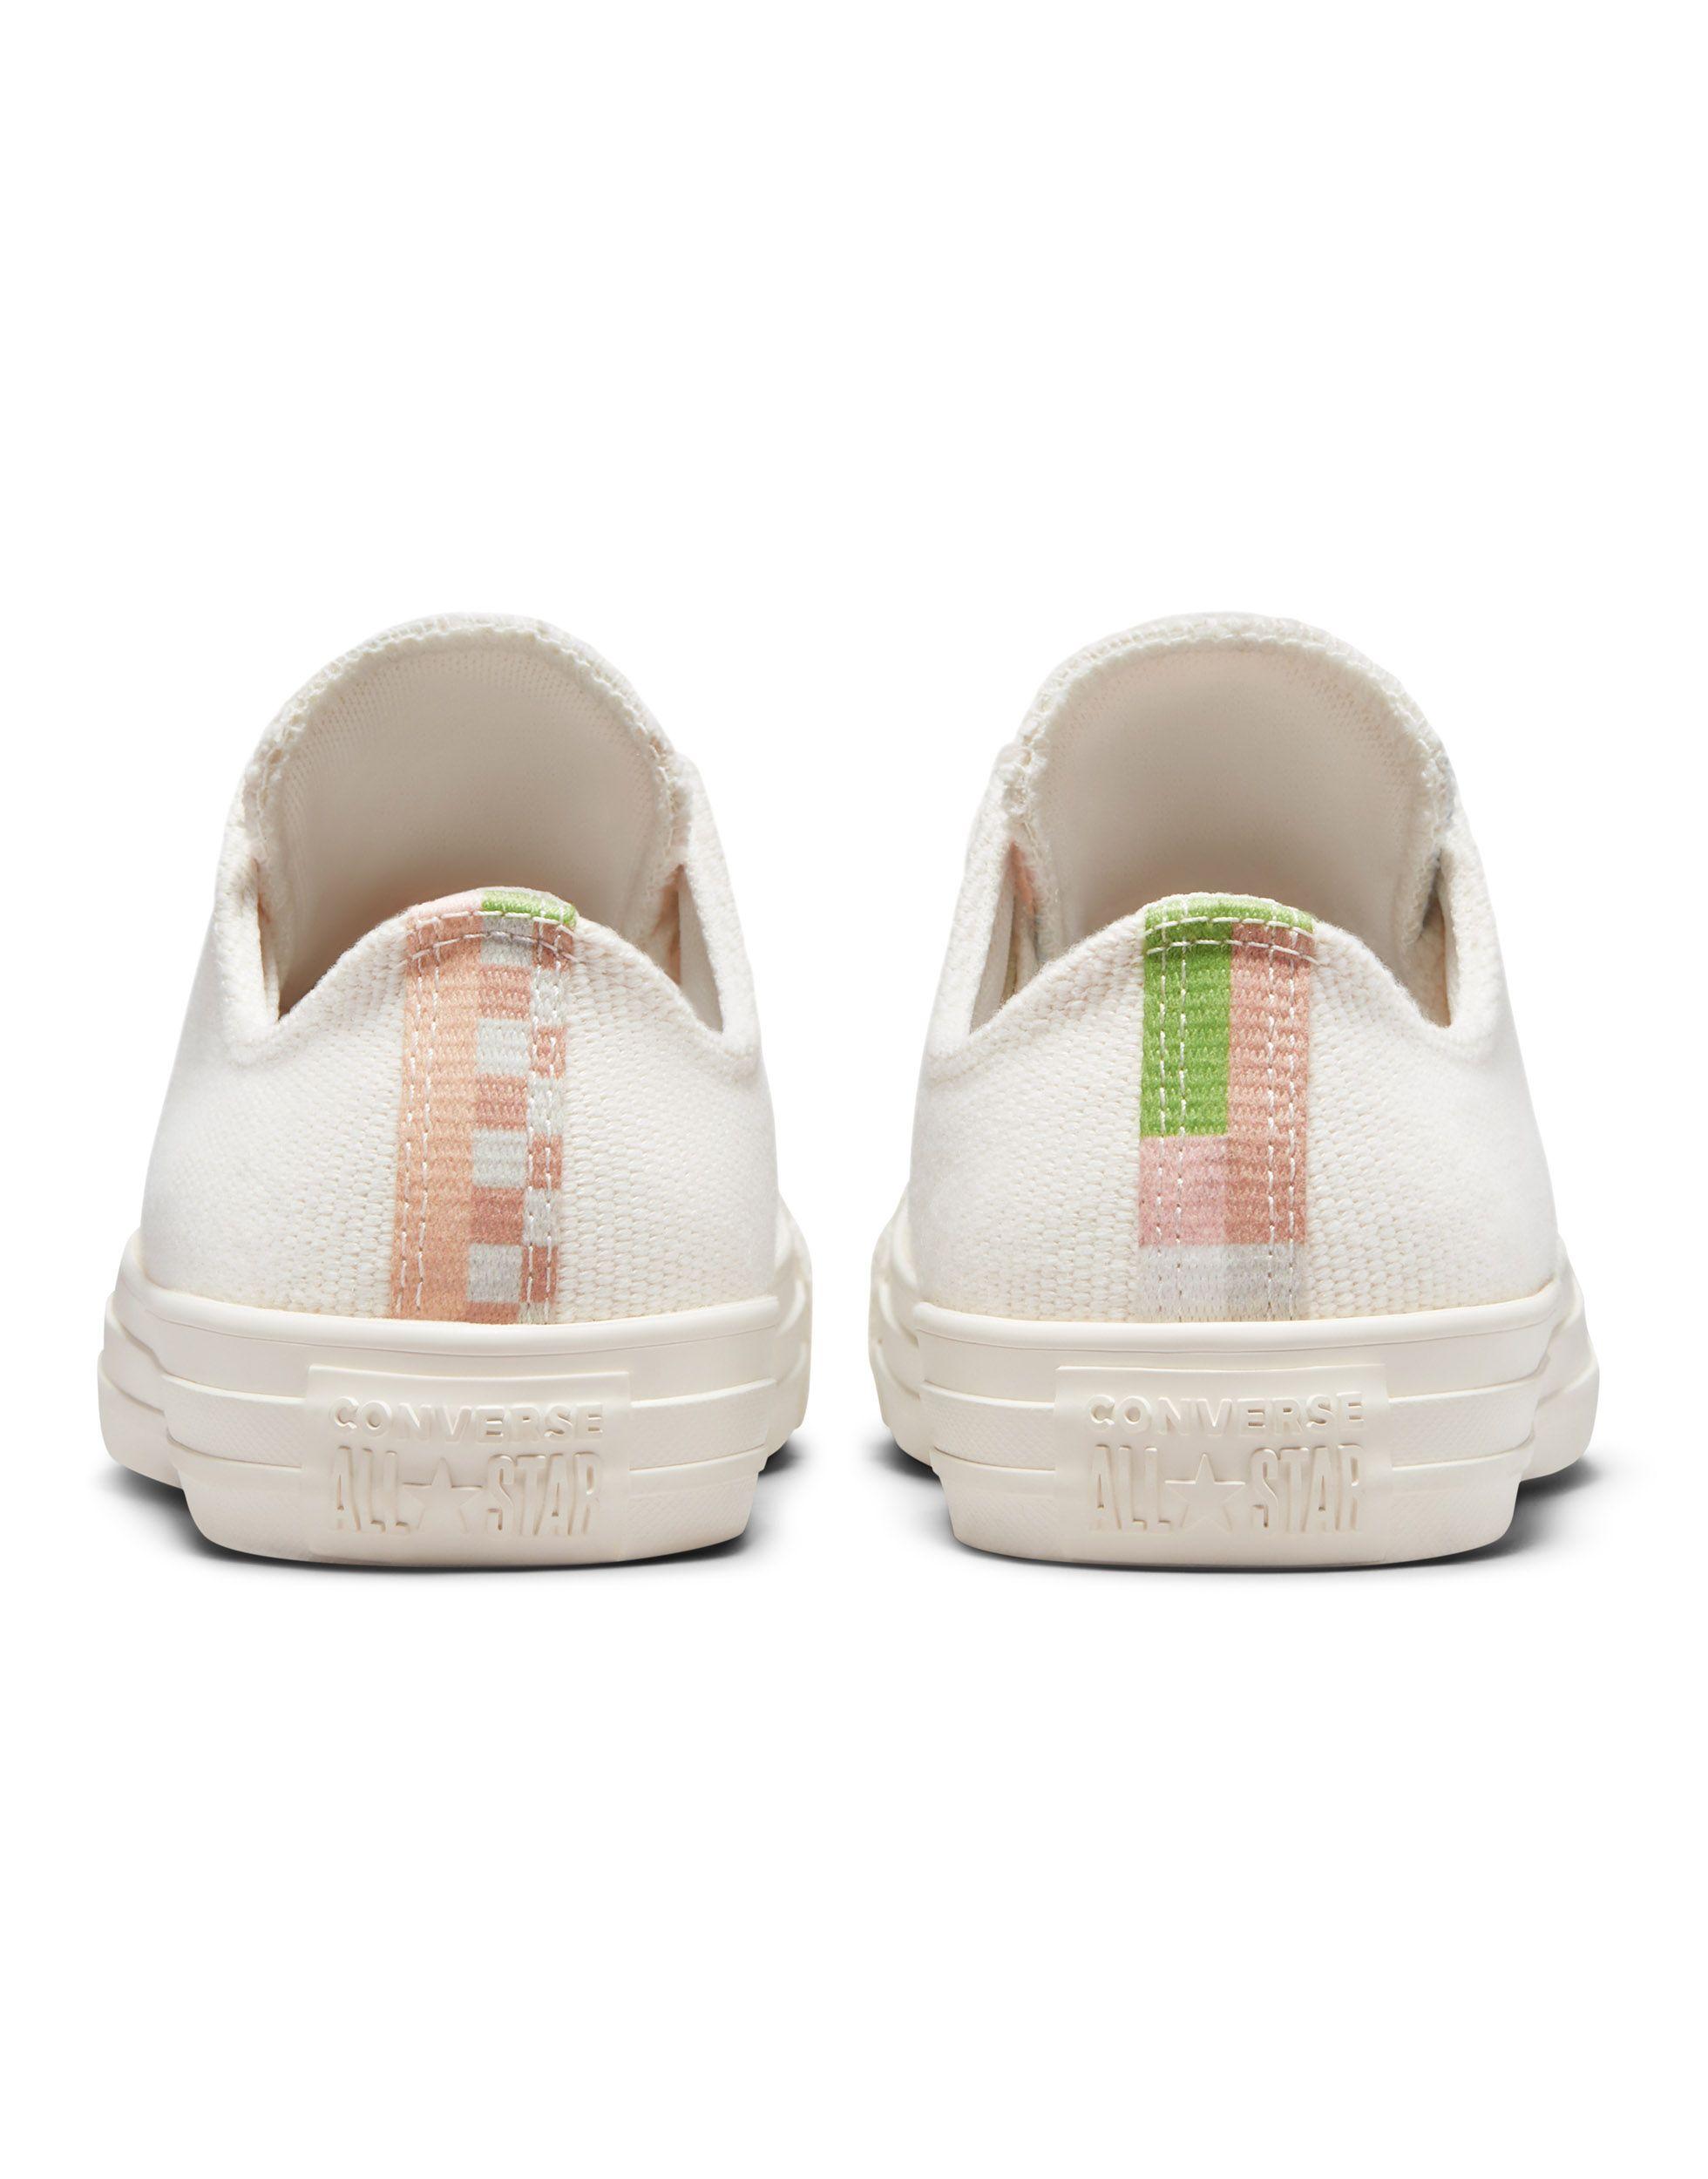 ost Dæmon alarm Converse Chuck Taylor All Star Ox Crafted Folk Canvas Sneakers in White |  Lyst